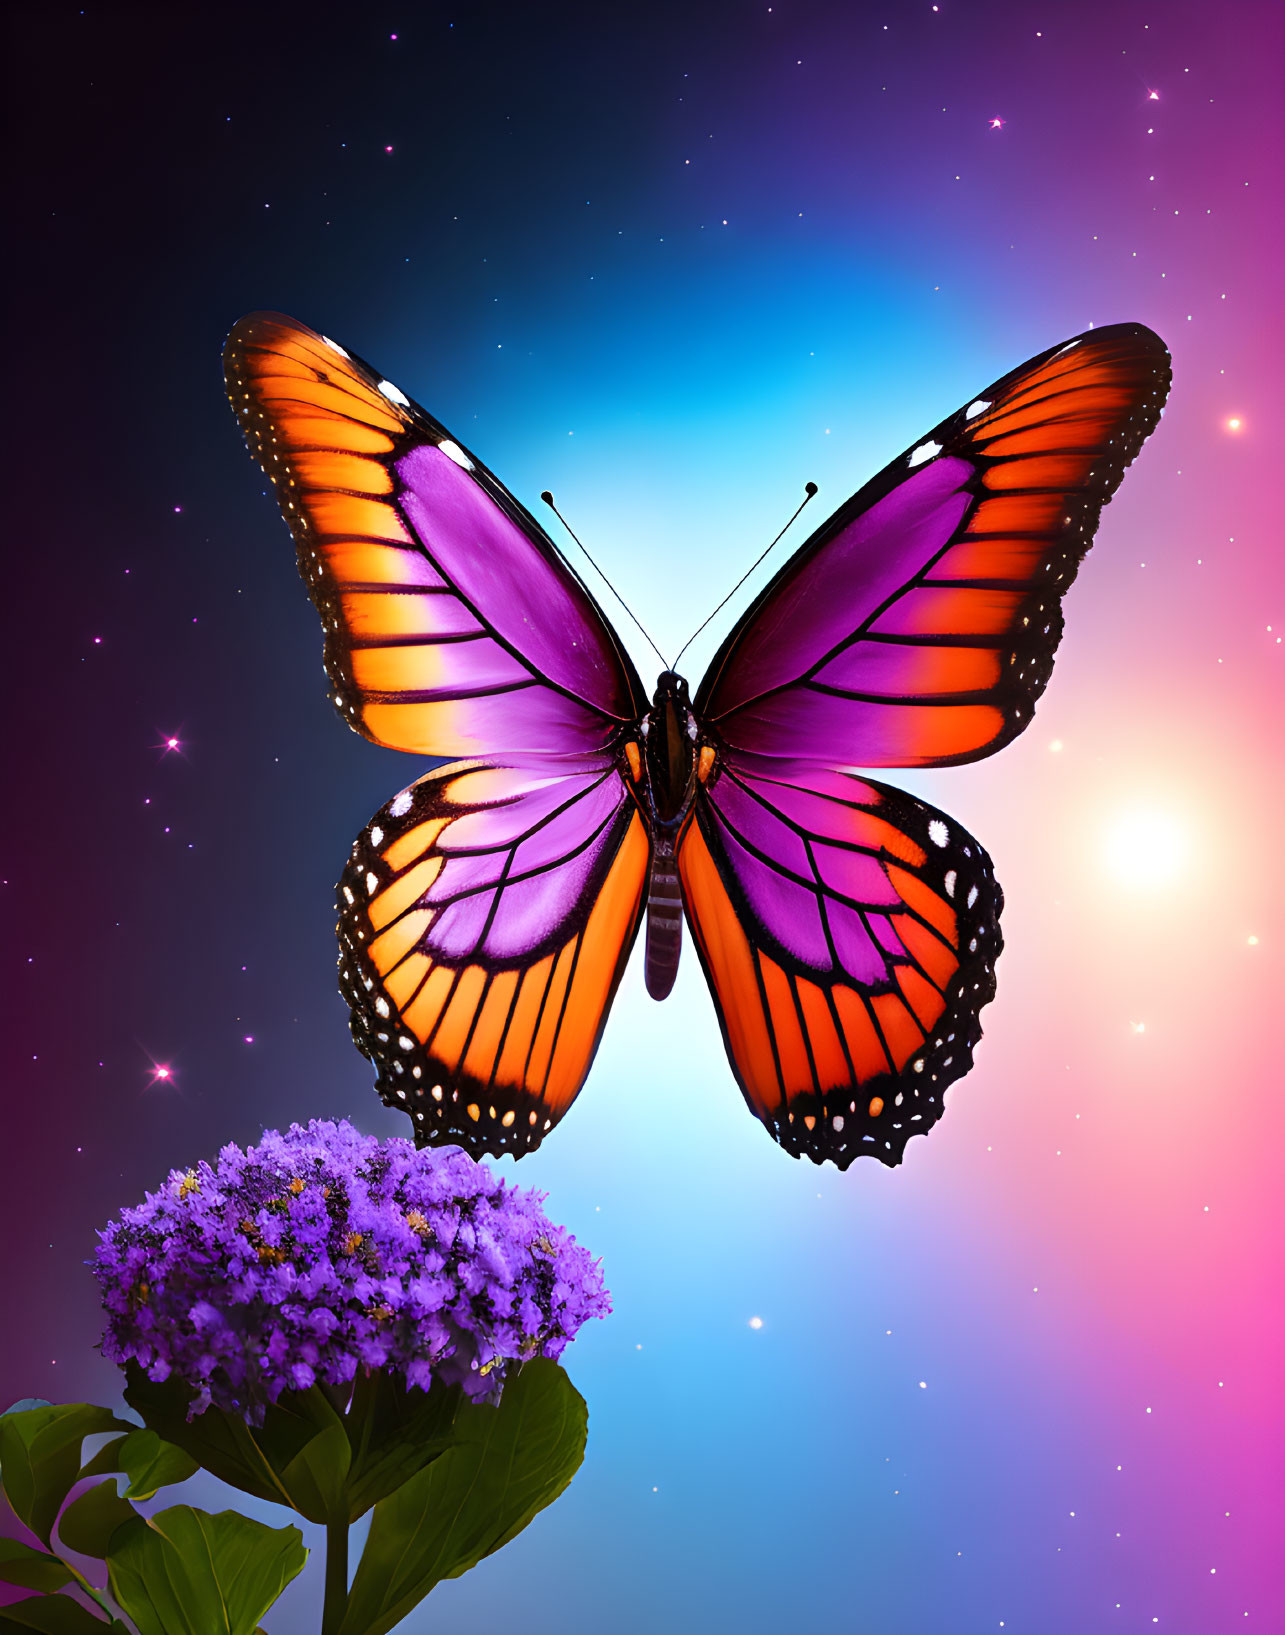 Colorful butterfly with open wings above purple flower in cosmic setting